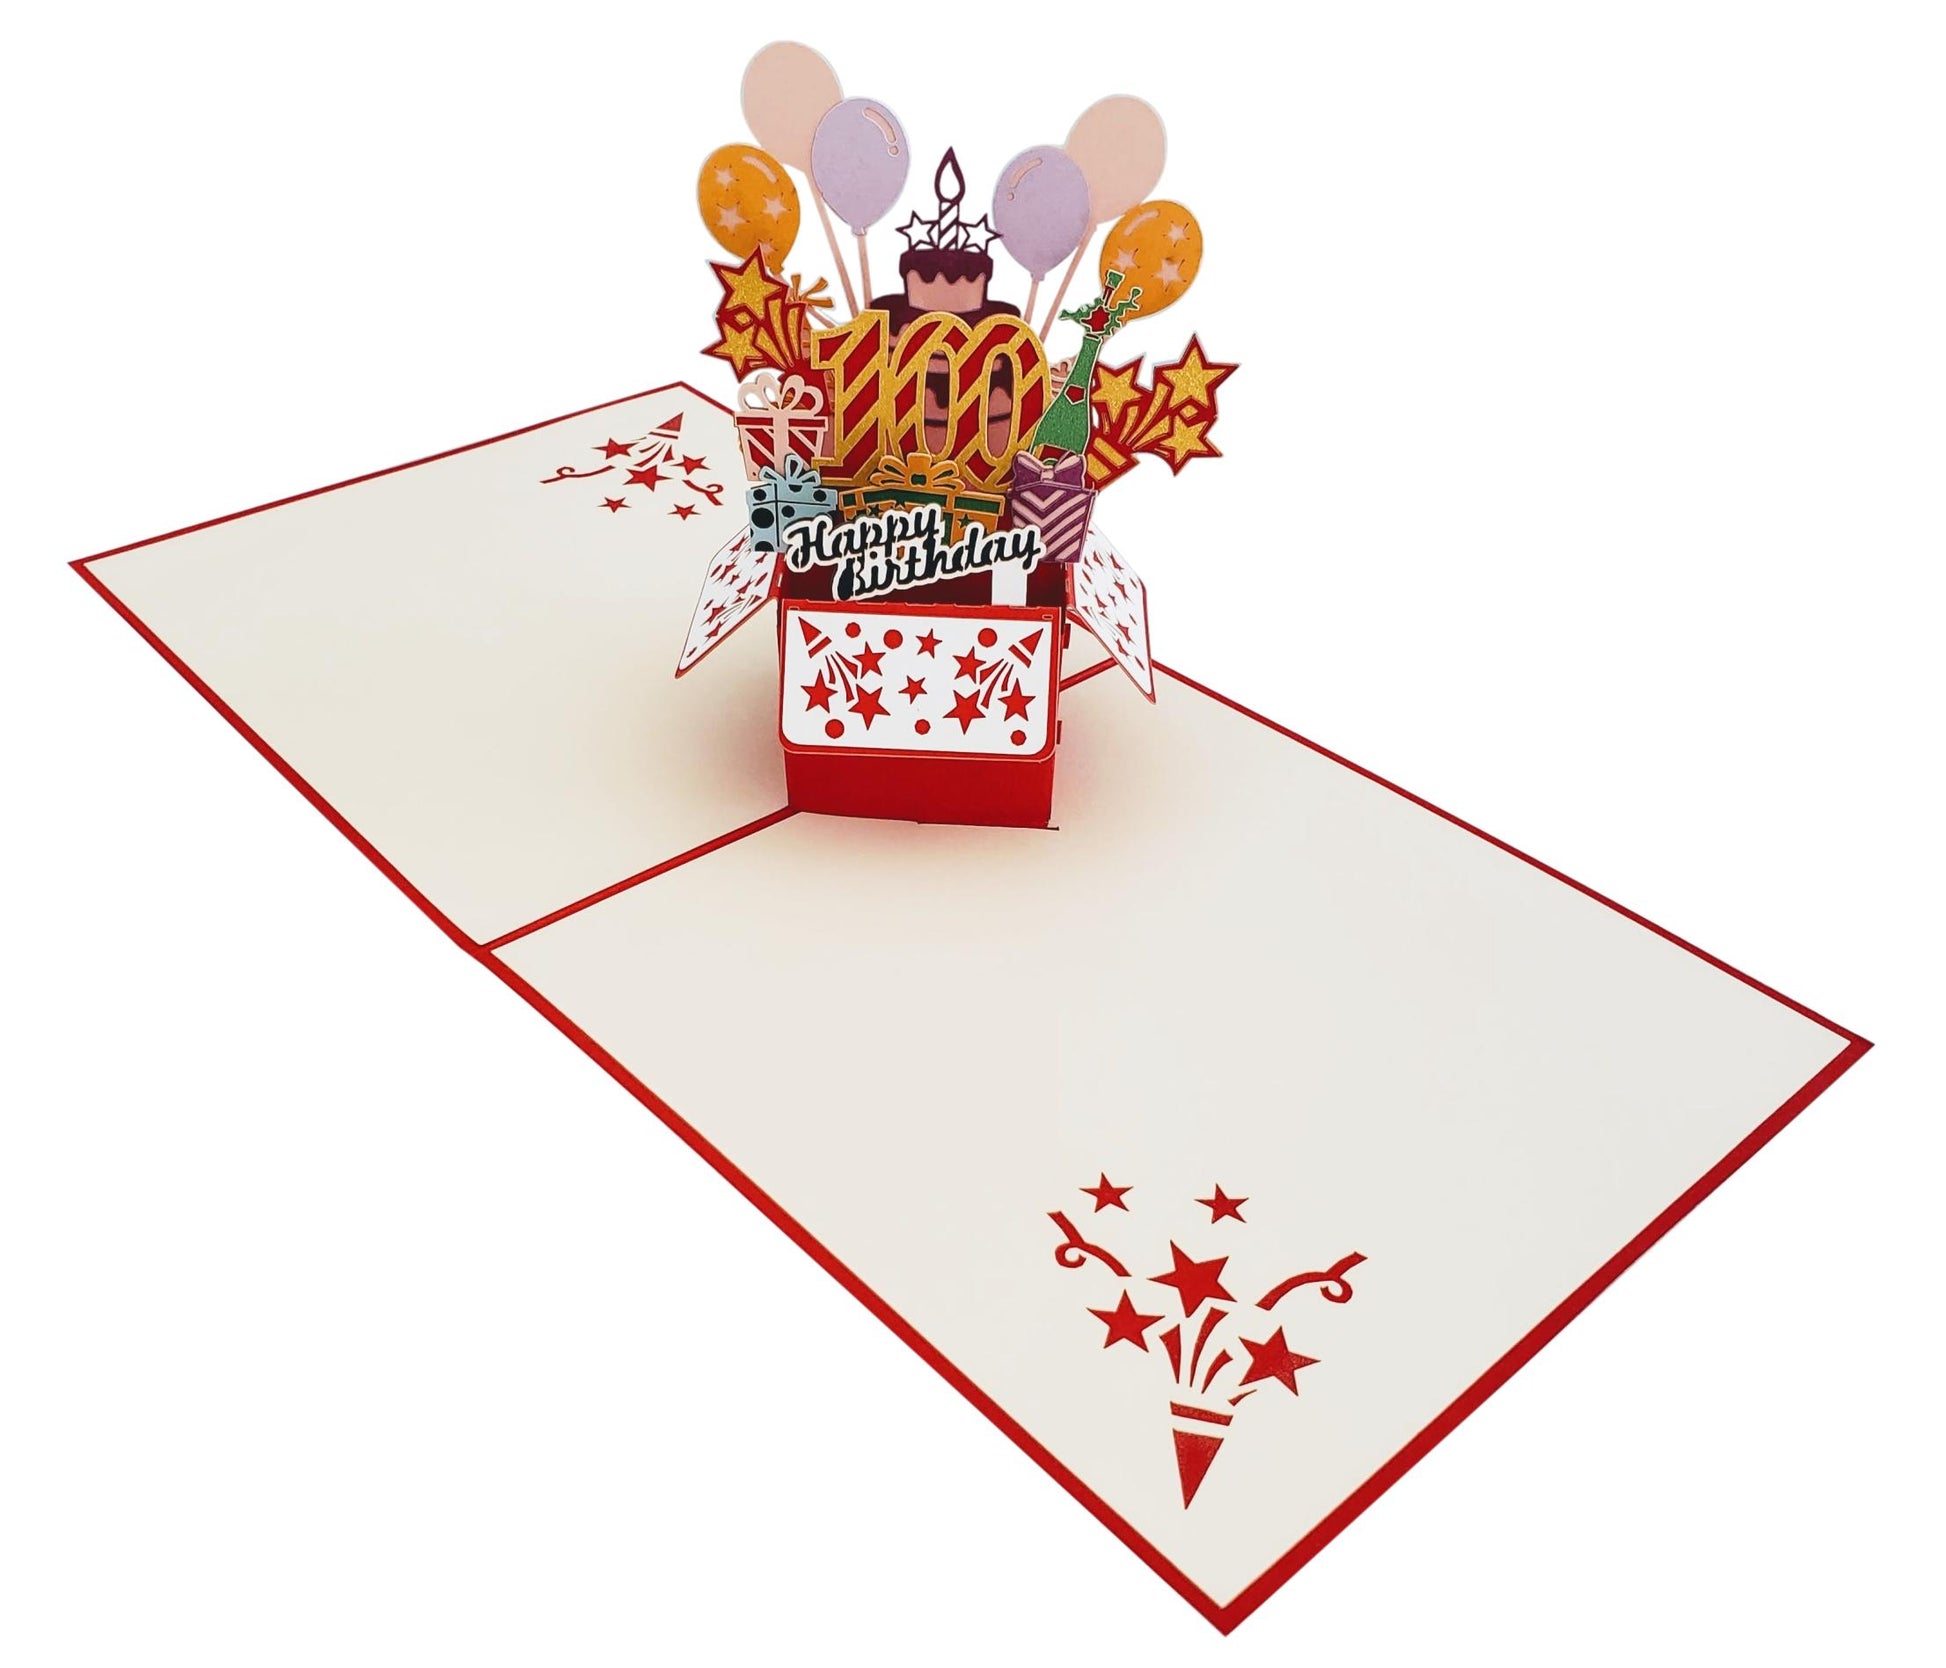 Happy 100th Birthday Red Party Box 3D Pop Up Greeting Card - Birthday - Fun - Milestone - Special Da - iGifts And Cards